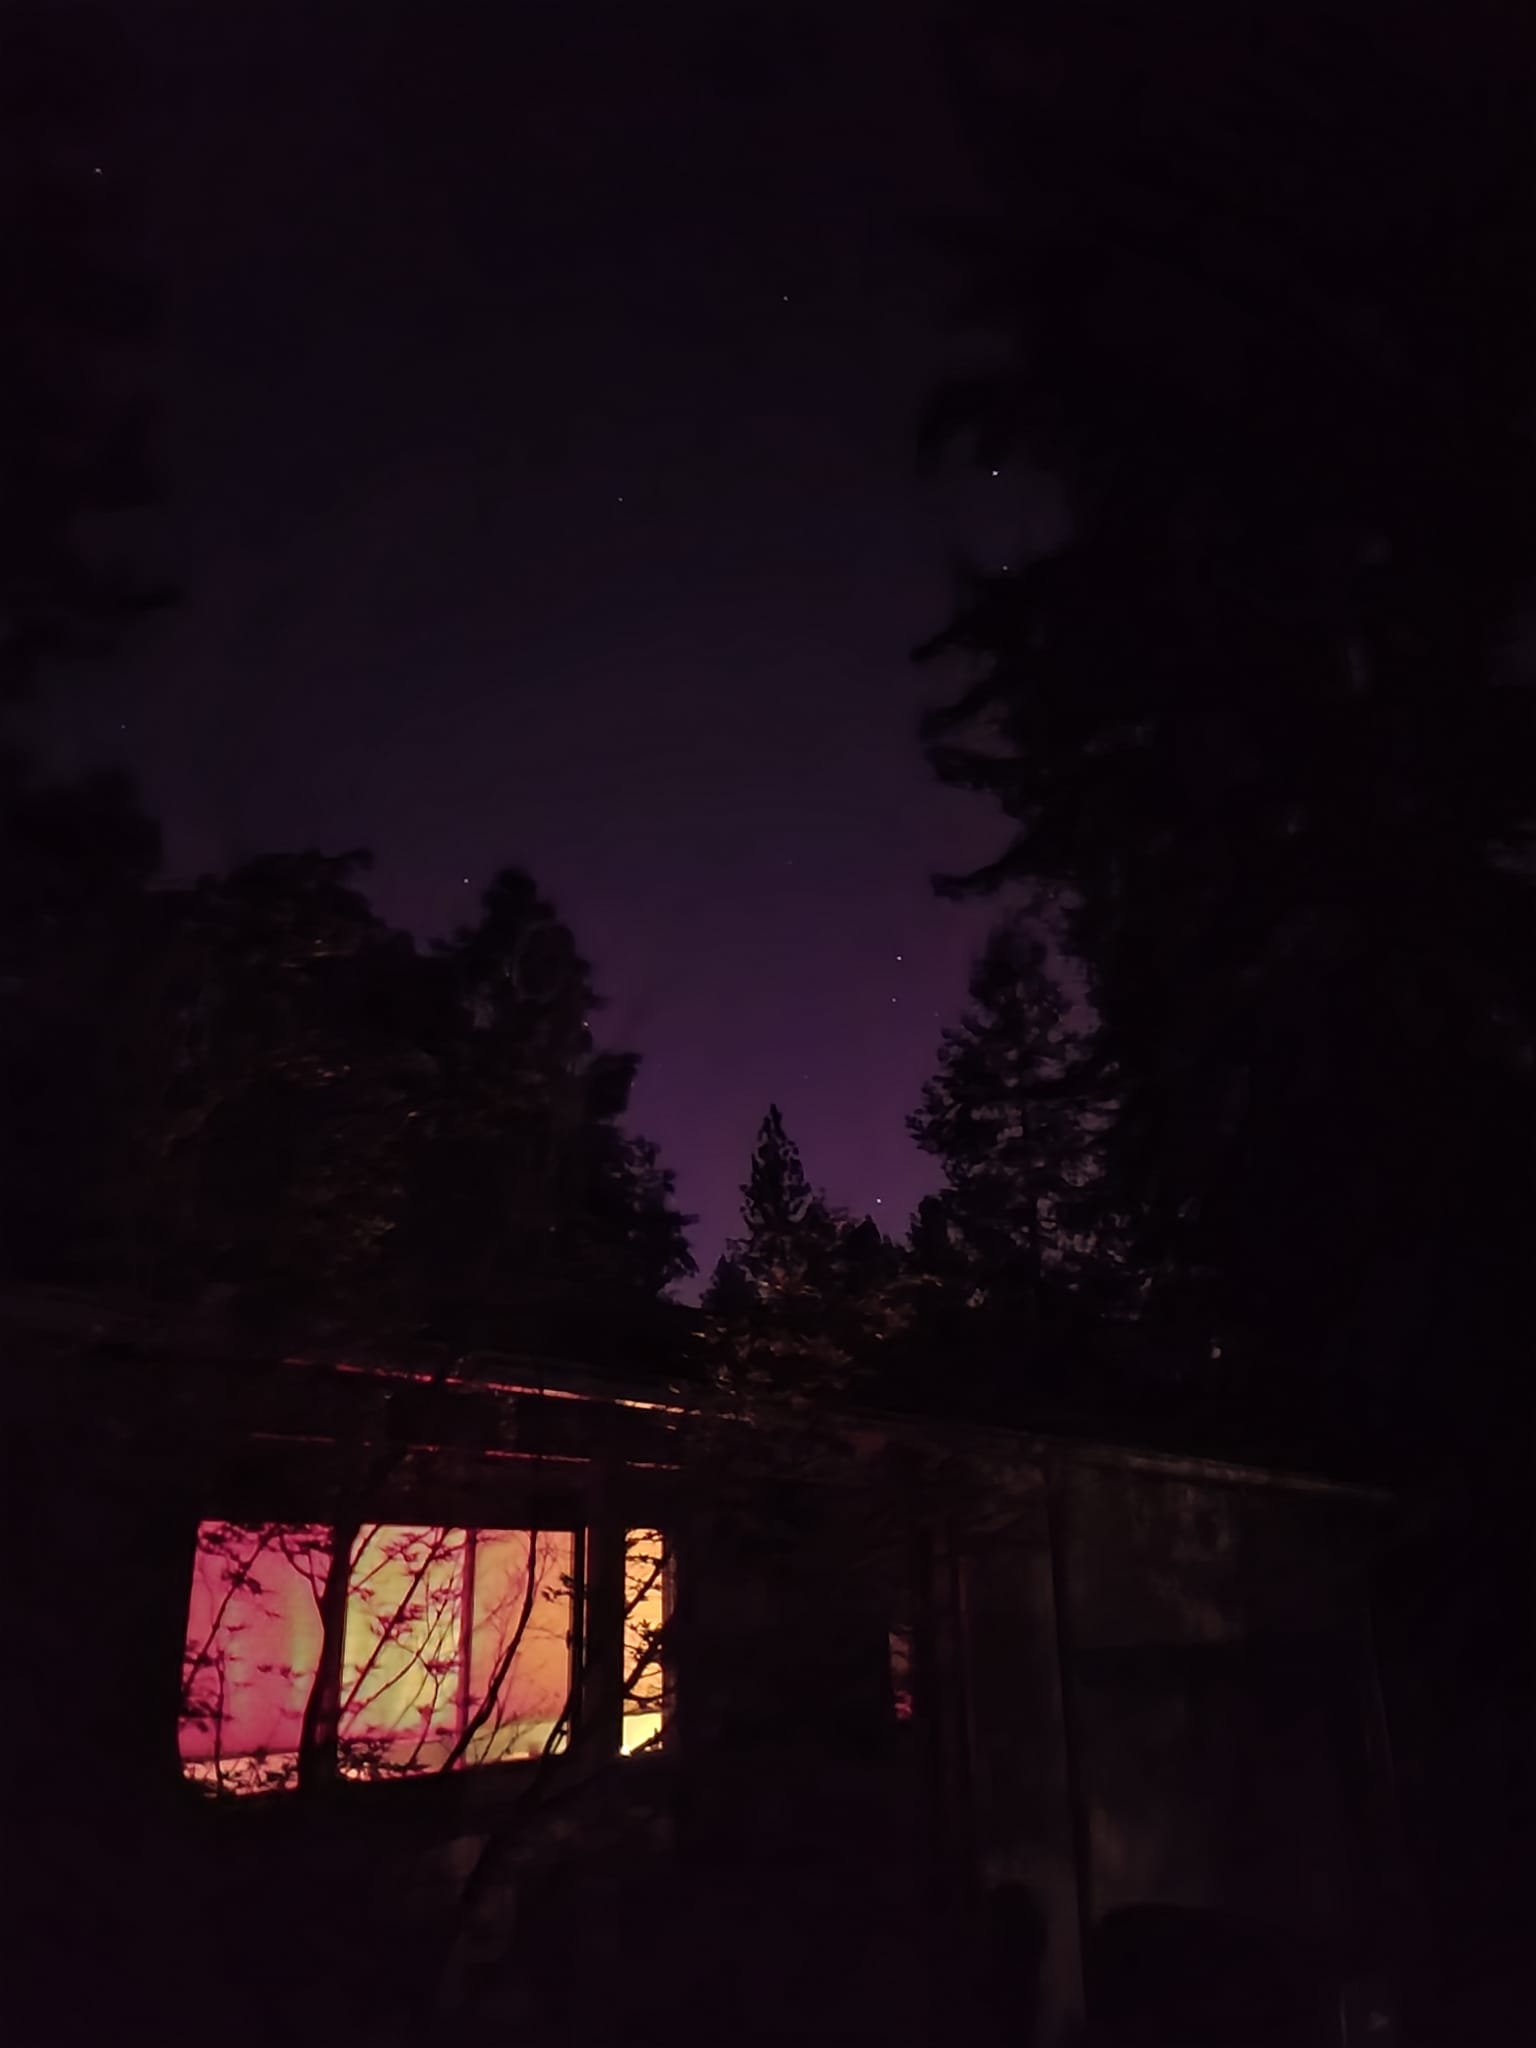 My human eyes couldn't pick up the Northern Lights. 

But the awe I felt looking at my phone screen was exquisite and so so worth it.

Could you see the lights where you were?

Drop a photo please of what you captured 💜